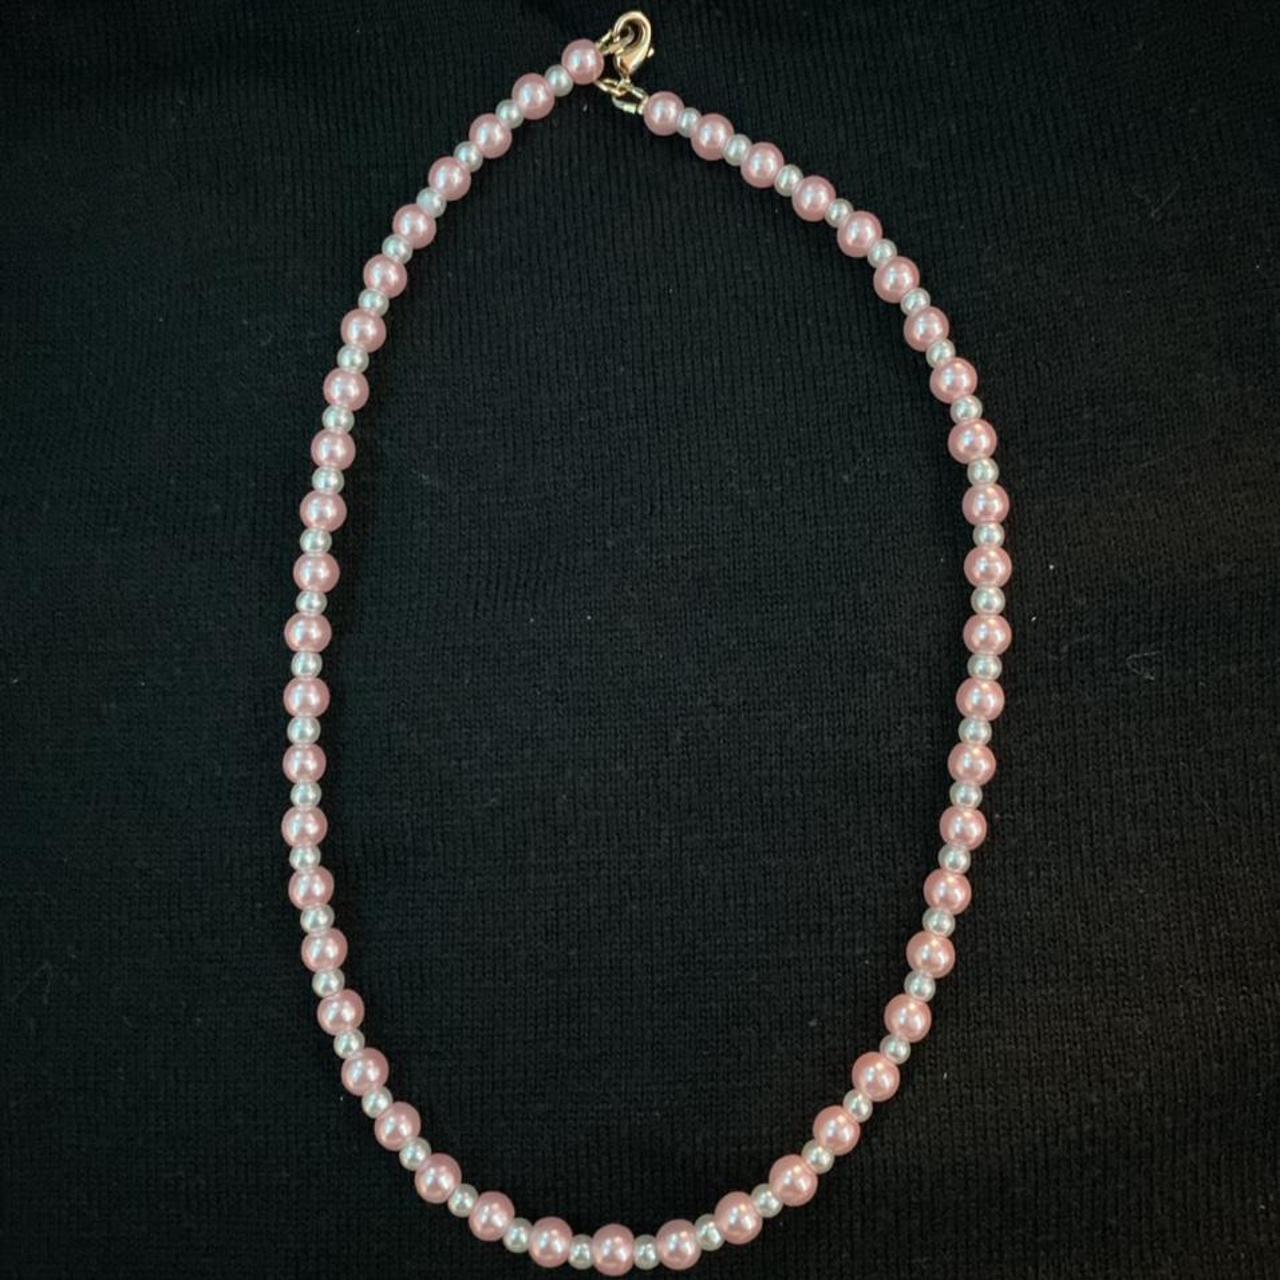 Product Image 1 - pink and white pearl necklace✨
-brand